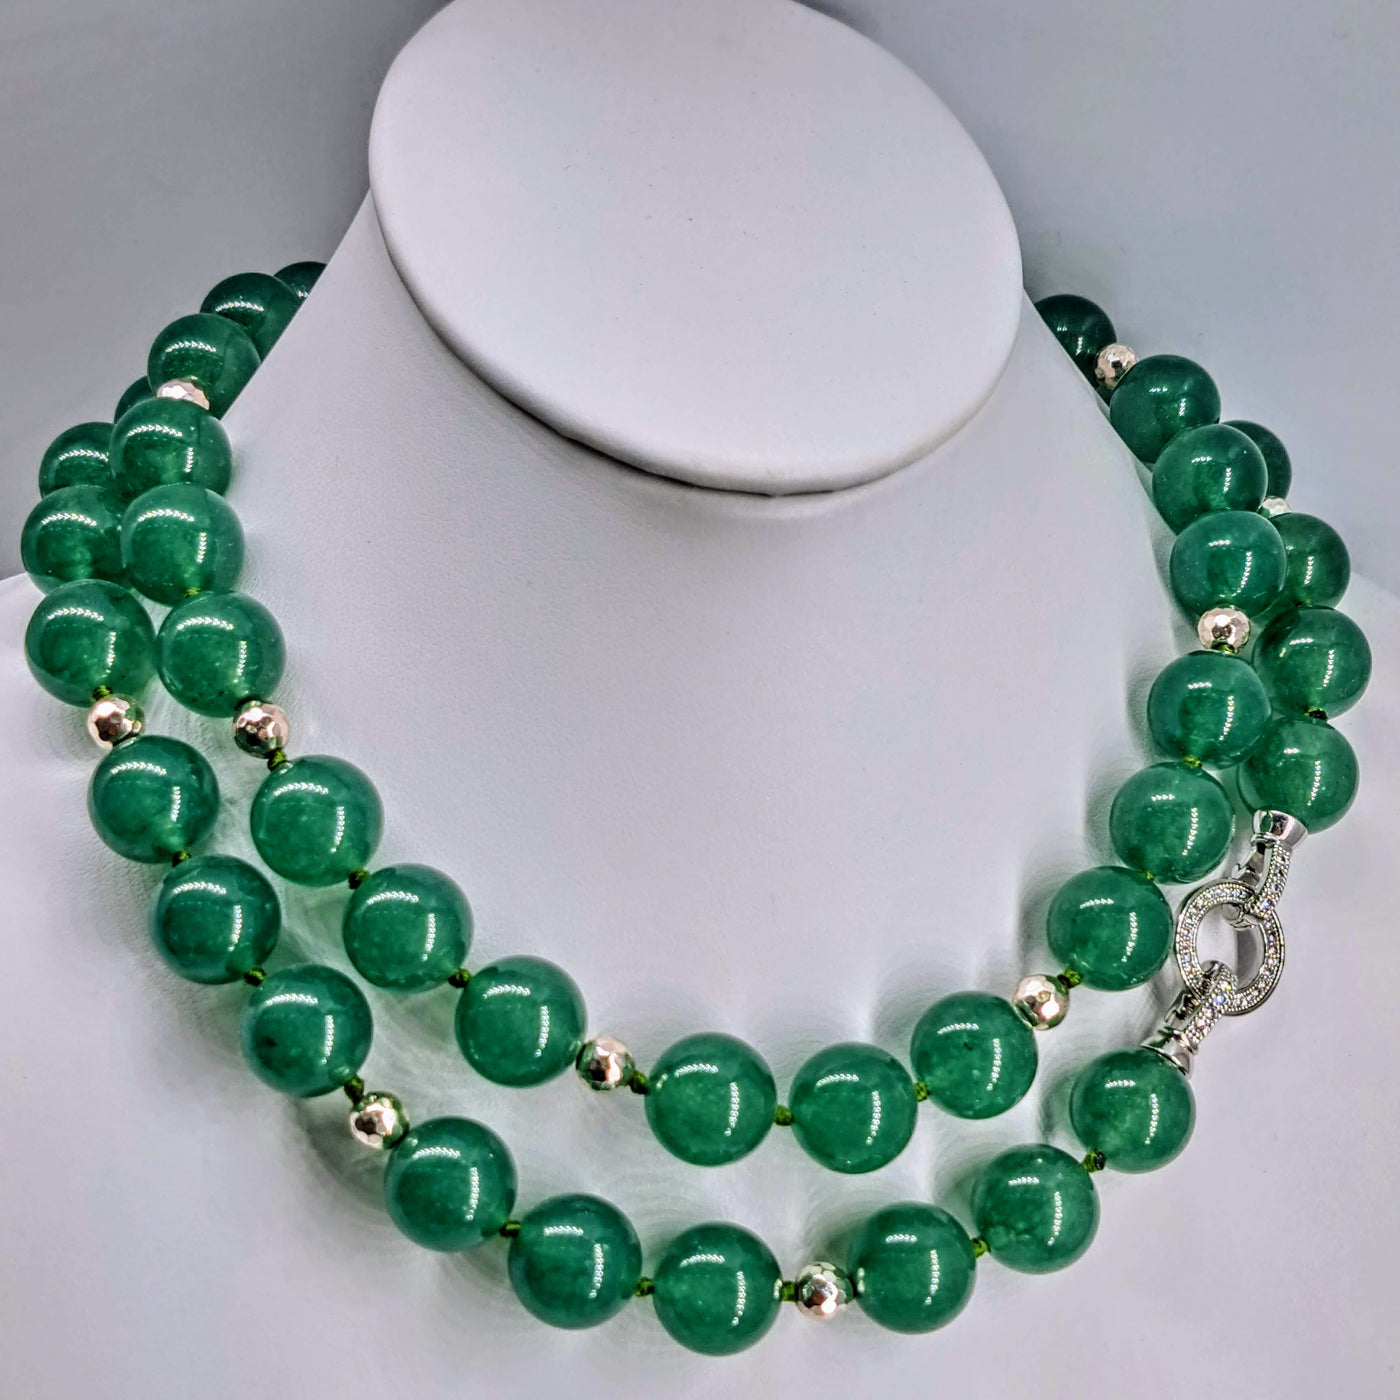 "Summer Greens" Necklace - Green Onyx, Sterling, White Topaz